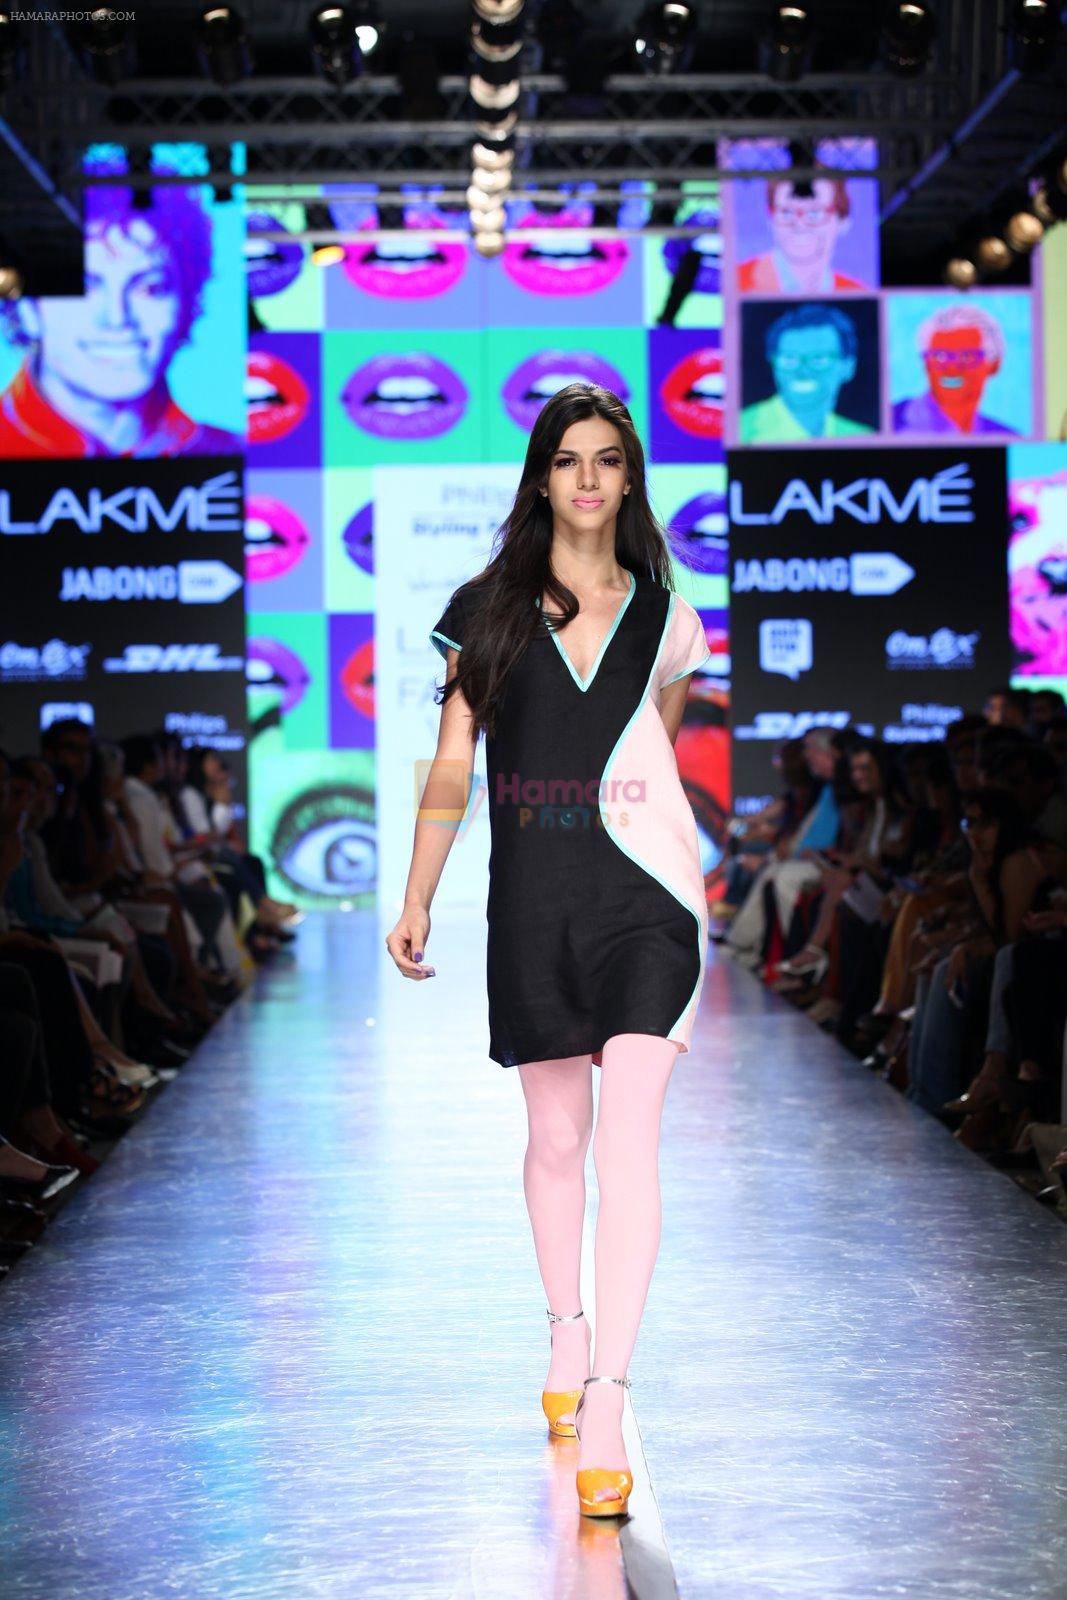 Model walk the ramp for Wendell Rodricks Show at Lakme Fashion Week 2015 Day 5 on 22nd March 2015